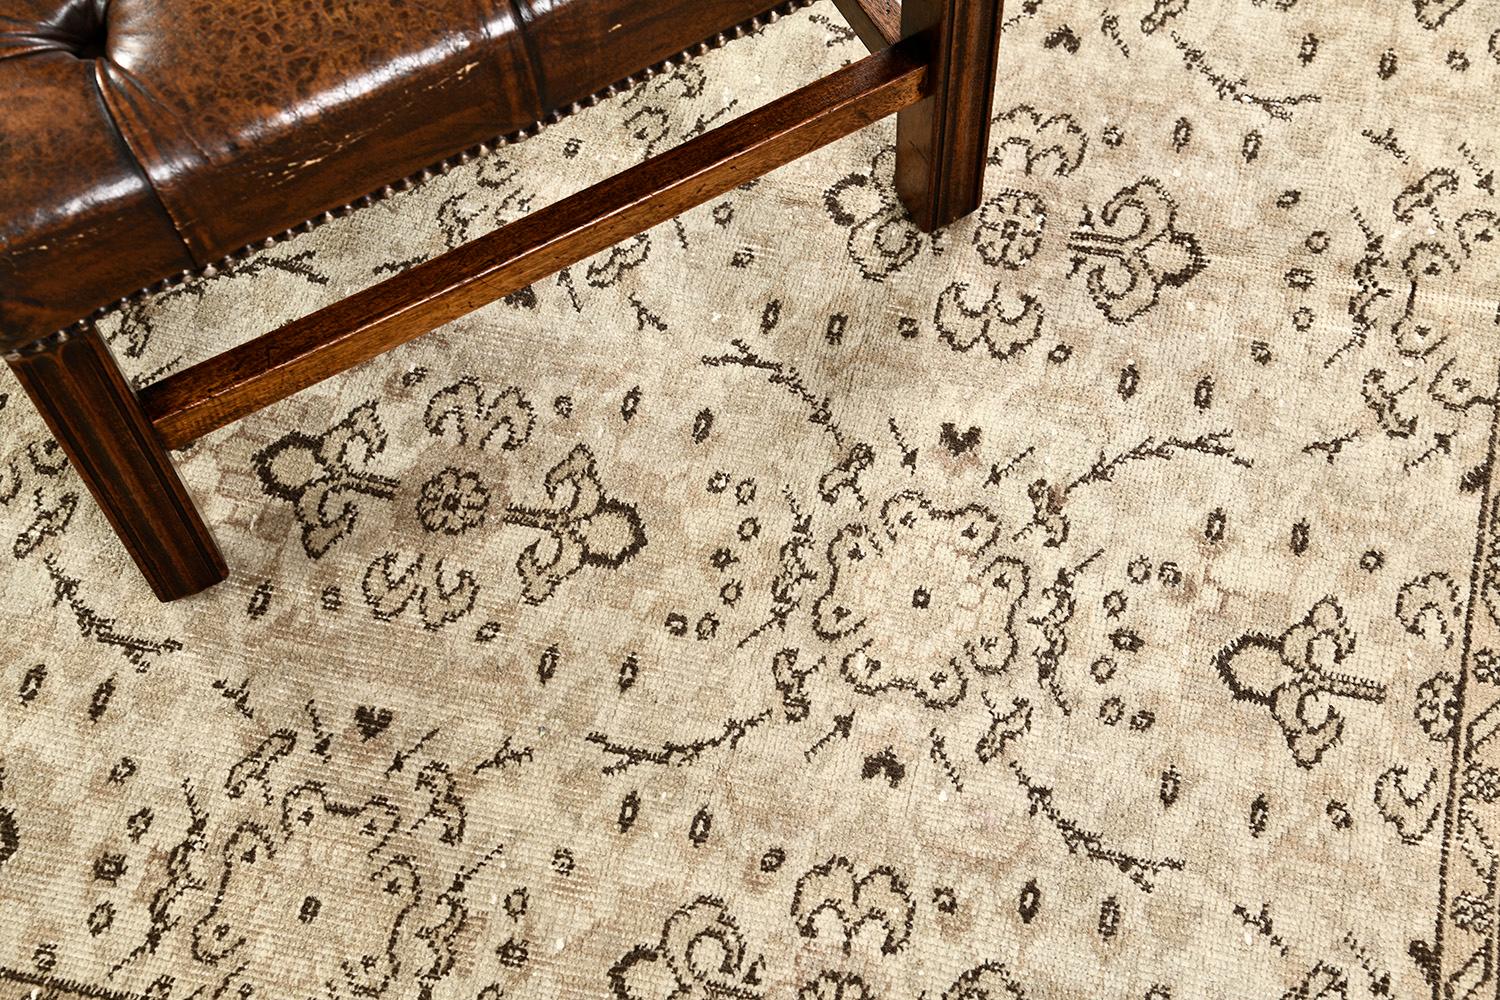 A timeless and luxurious vintage Anatolian rug has its soft tan field that brings life and light to your spaces. This rug is cultivated with symmetrical patterns of delicate vines and outlines through beautiful wool. Anatolian was made to be lived